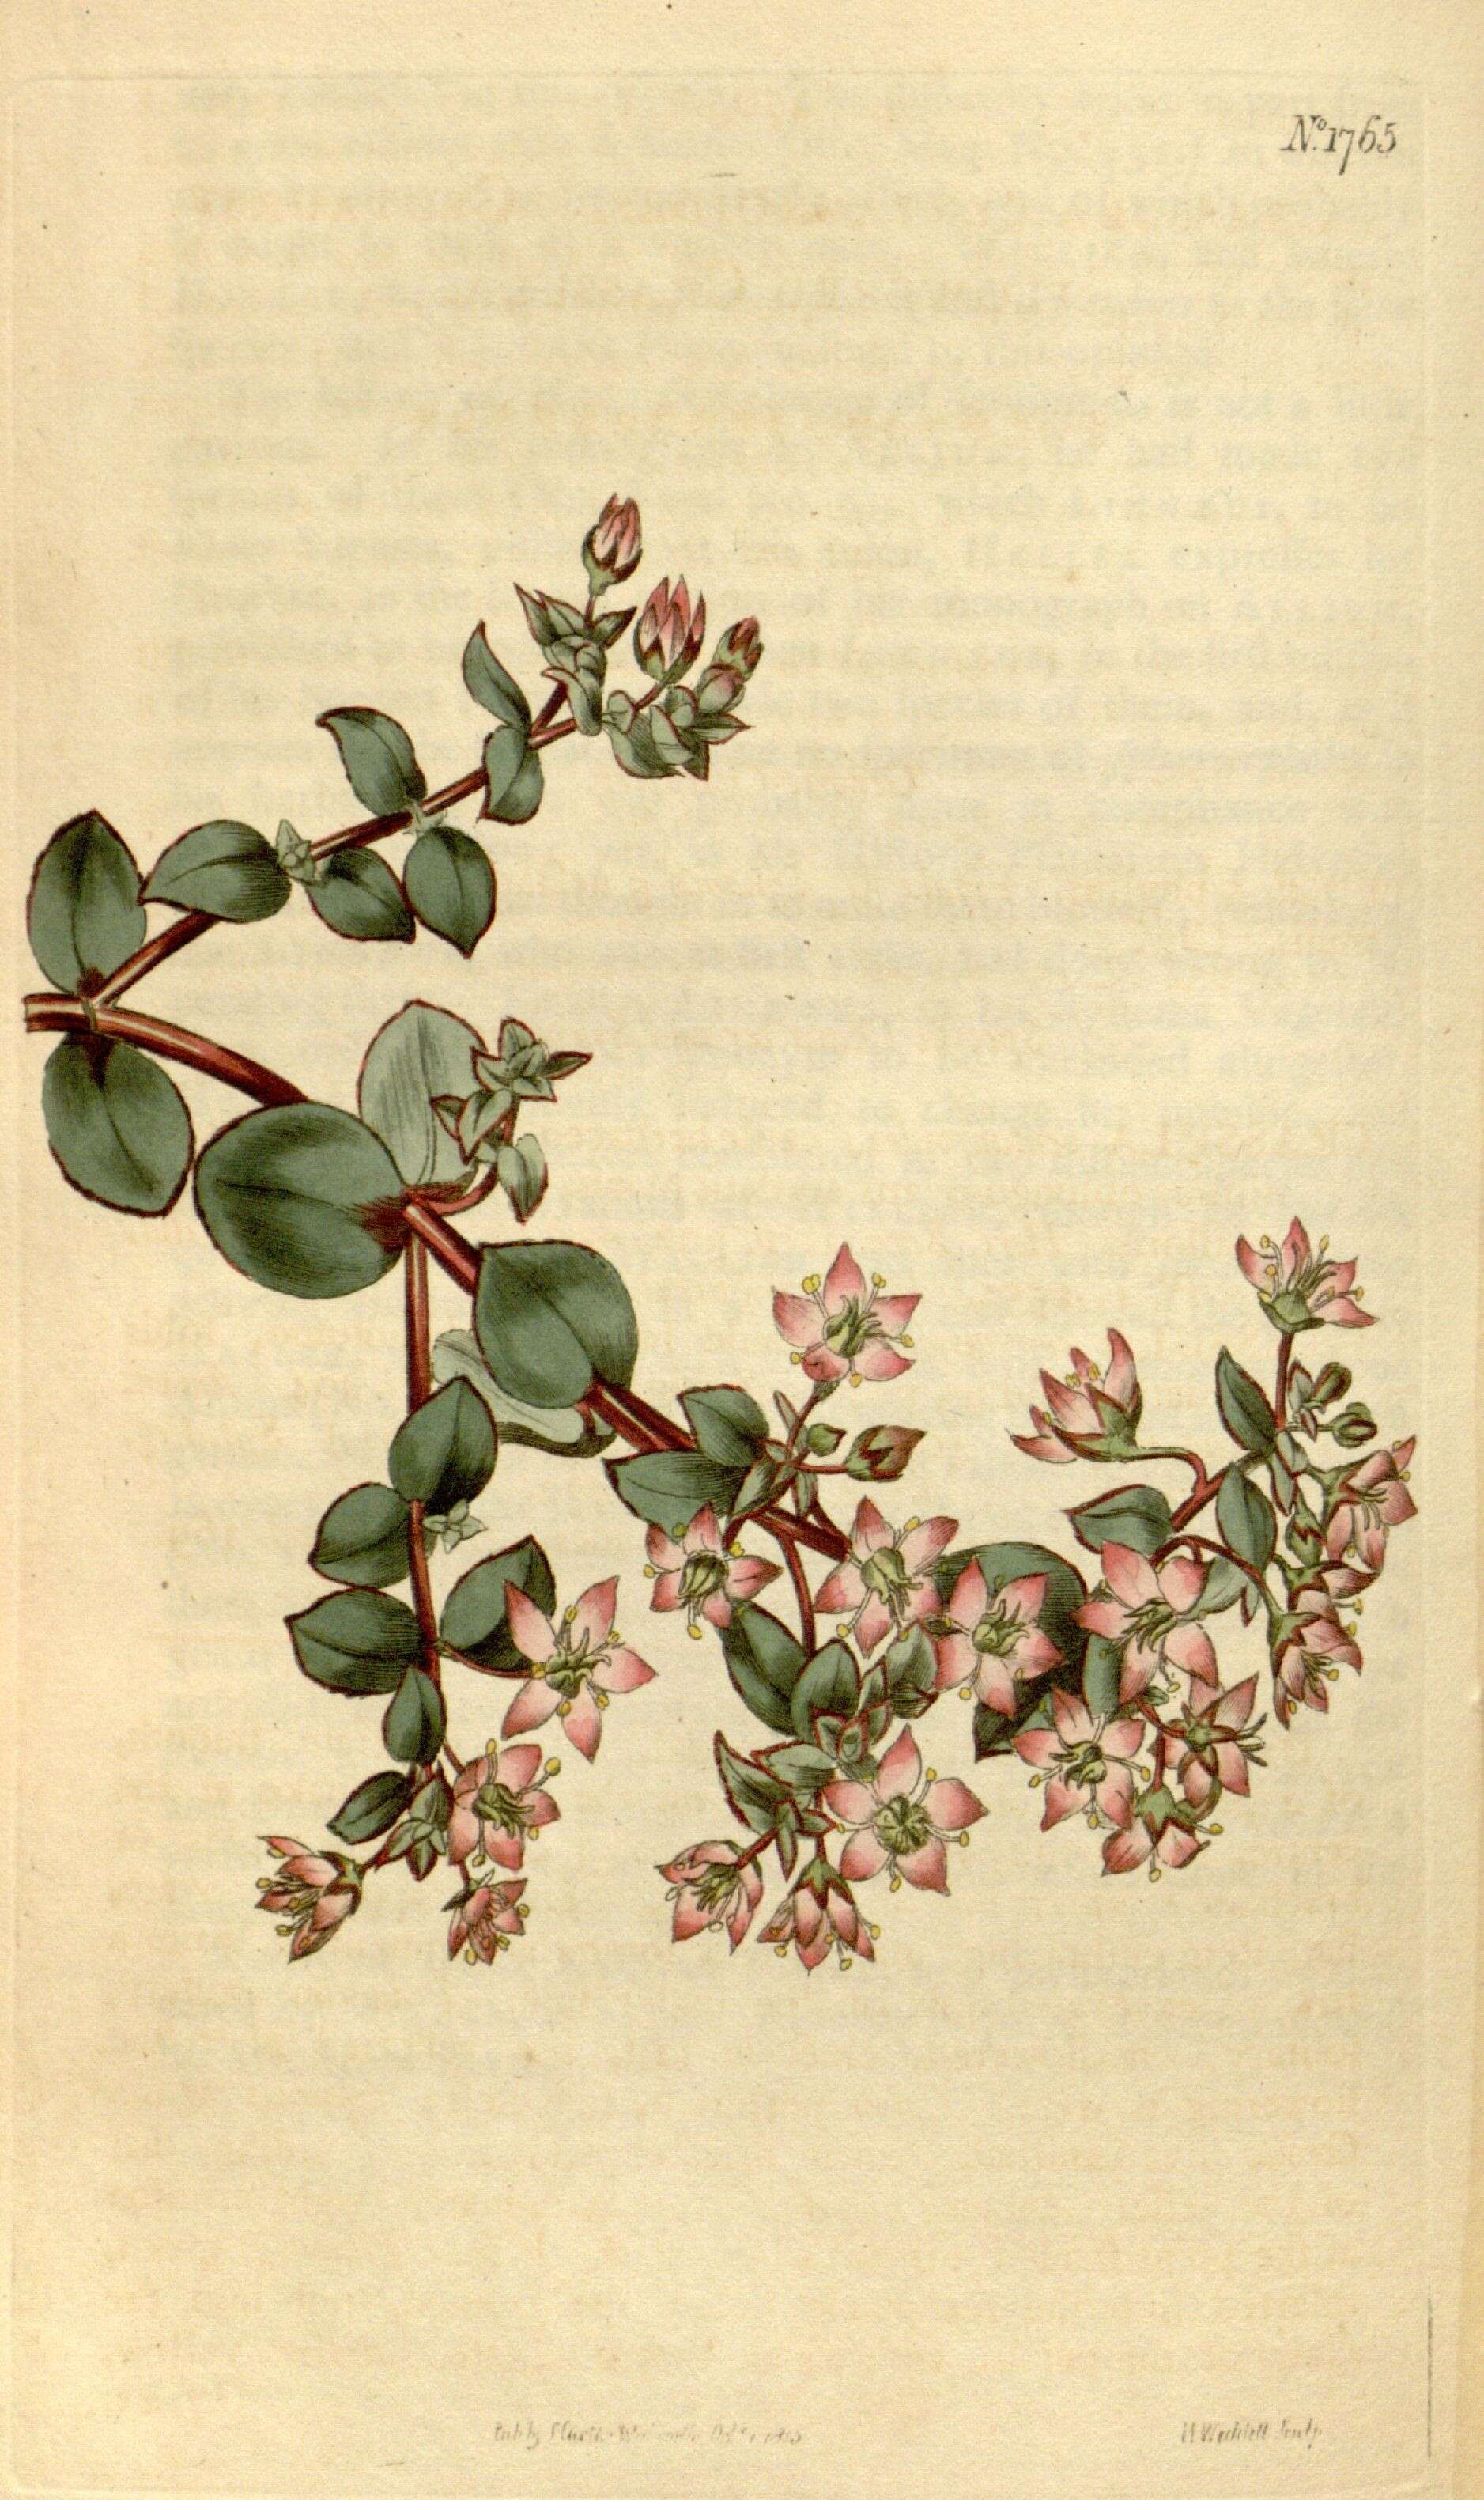 Image of stonecrop family